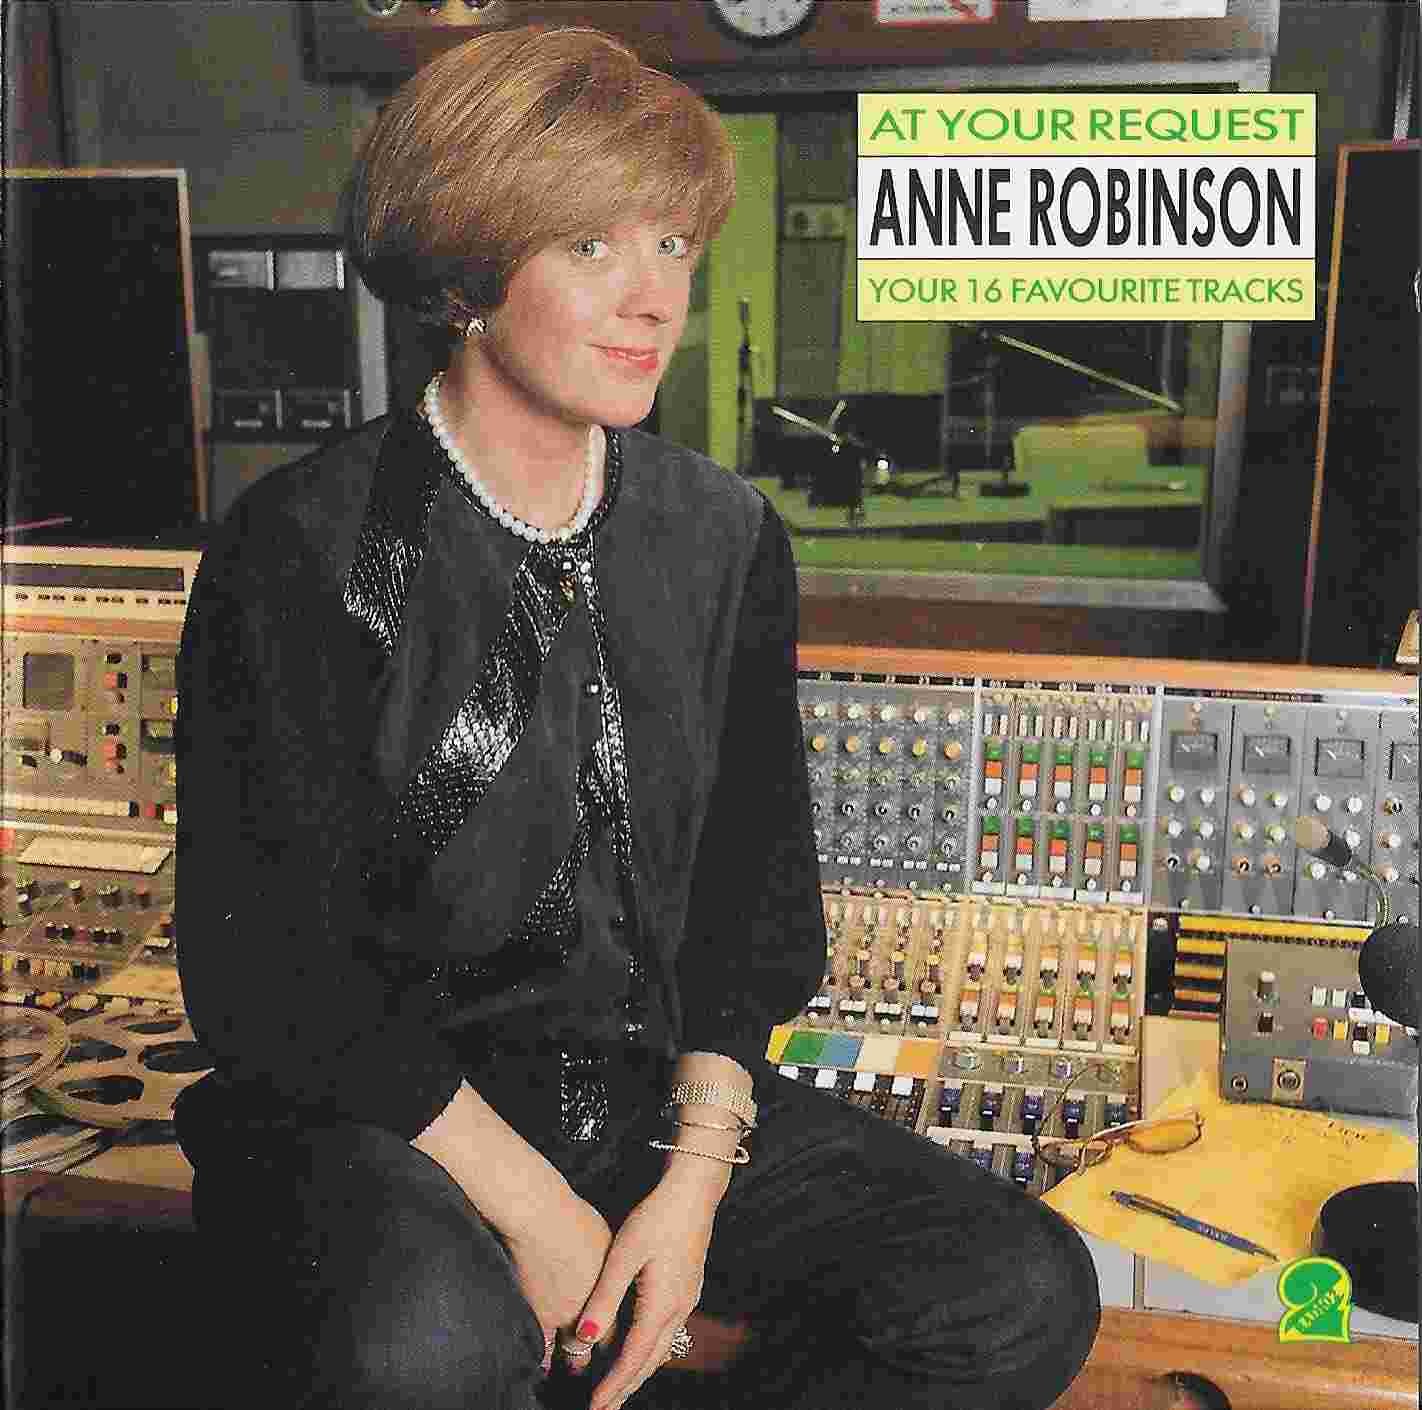 Picture of BBCCD733 At your request - Anne Robinson by artist Various from the BBC cds - Records and Tapes library